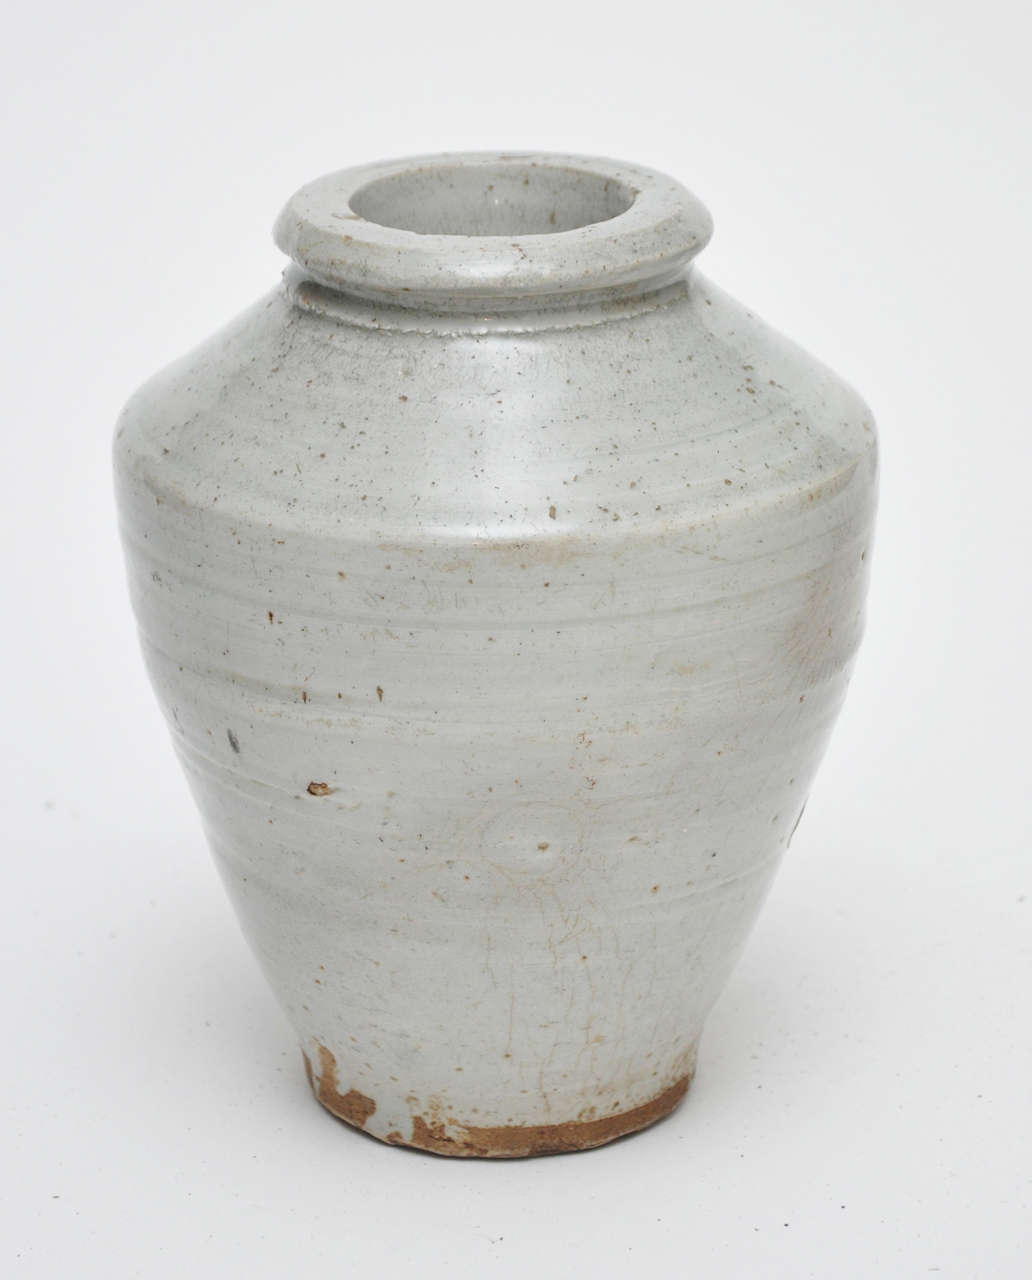 This is an extra large apothecary jar from the 12th century Yuan Dynasty done in a gray glaze.